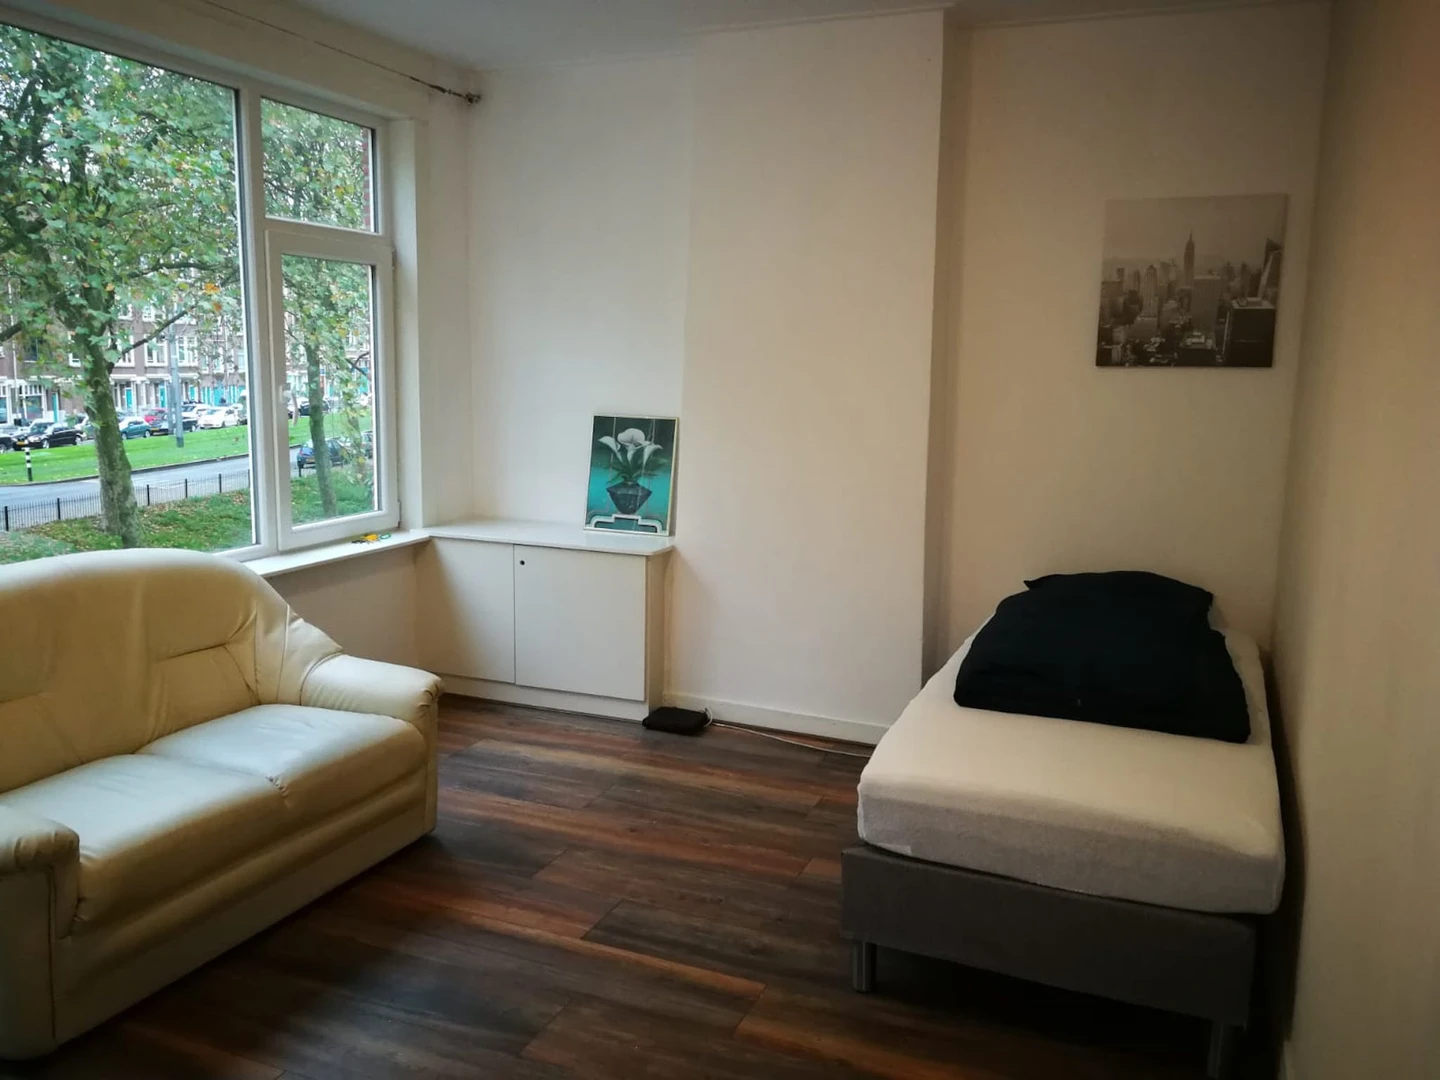 Room for rent in a shared flat in rotterdam